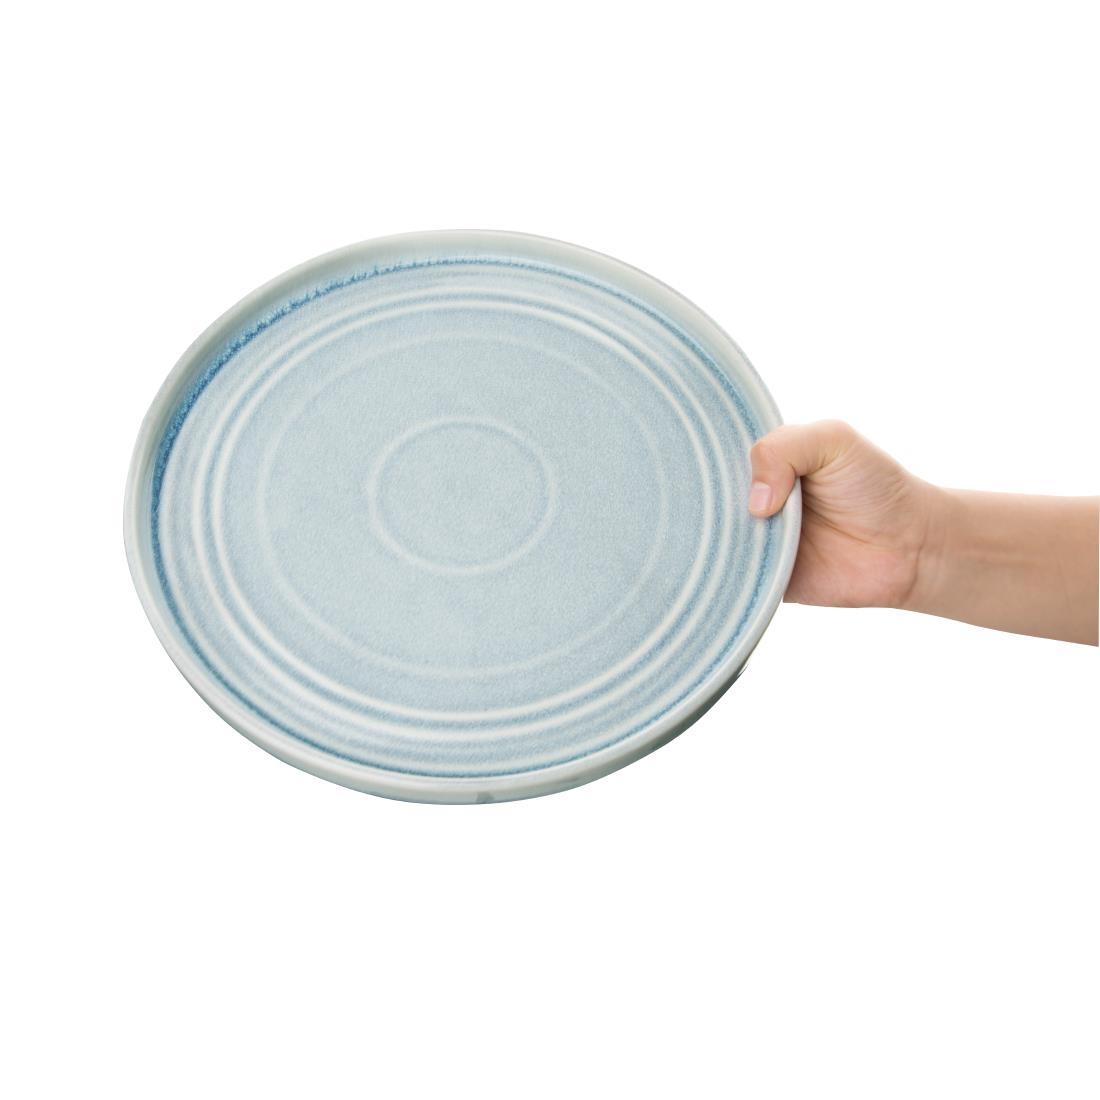 Olympia Cavolo Flat Round Plates Ice Blue 270mm (Pack of 4) - FB569  - 3